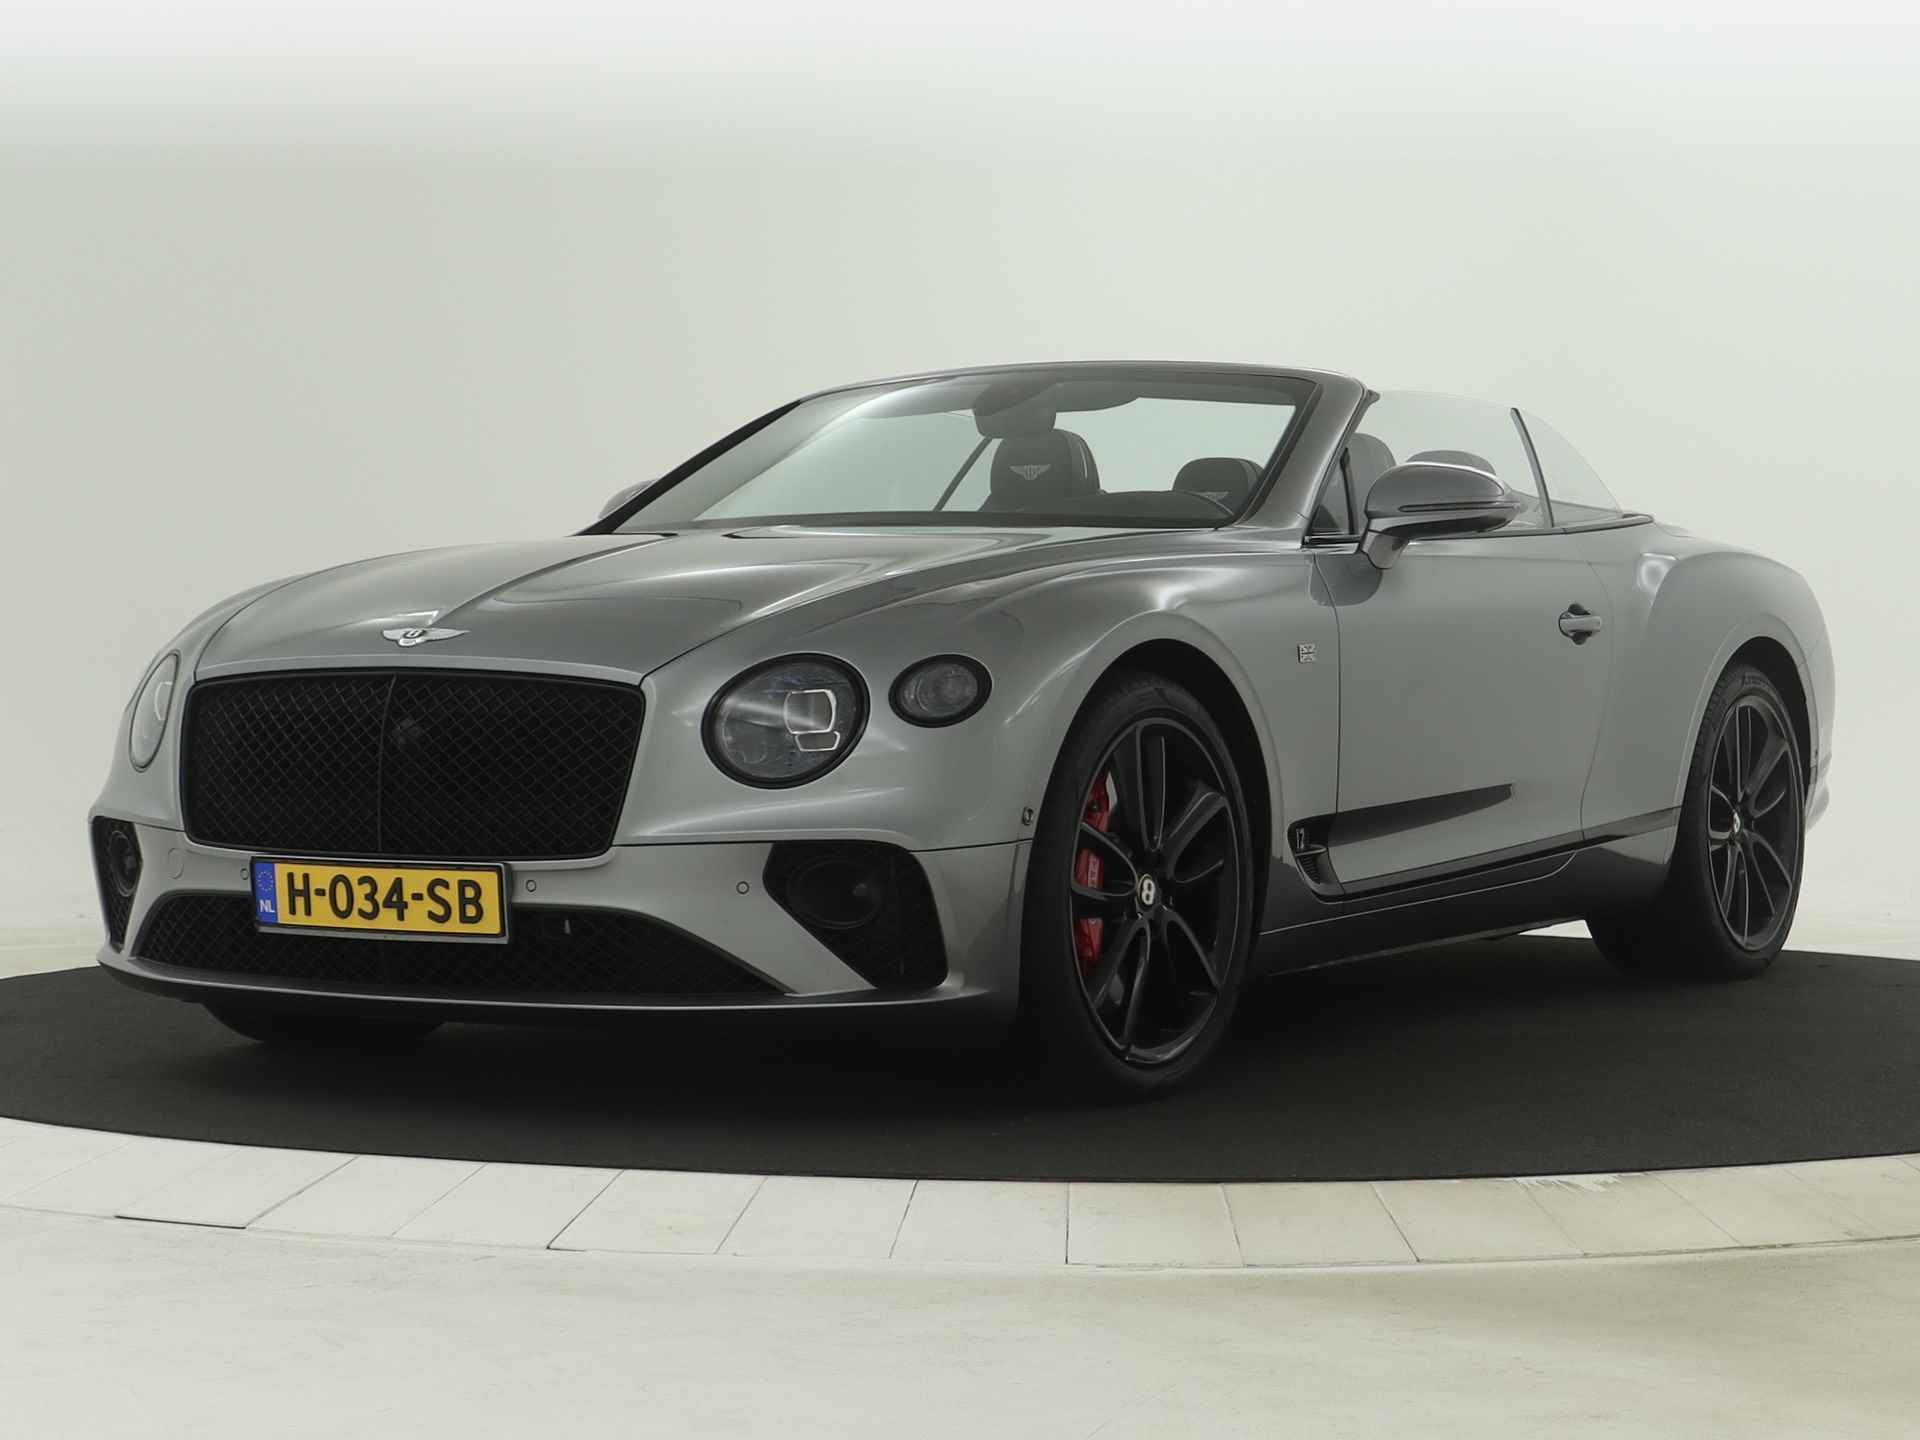 Bentley Continental GTC 6.0 W12 First Edition Mulliner - Bang & Olufsen - Black package - Massage seats - 1/46